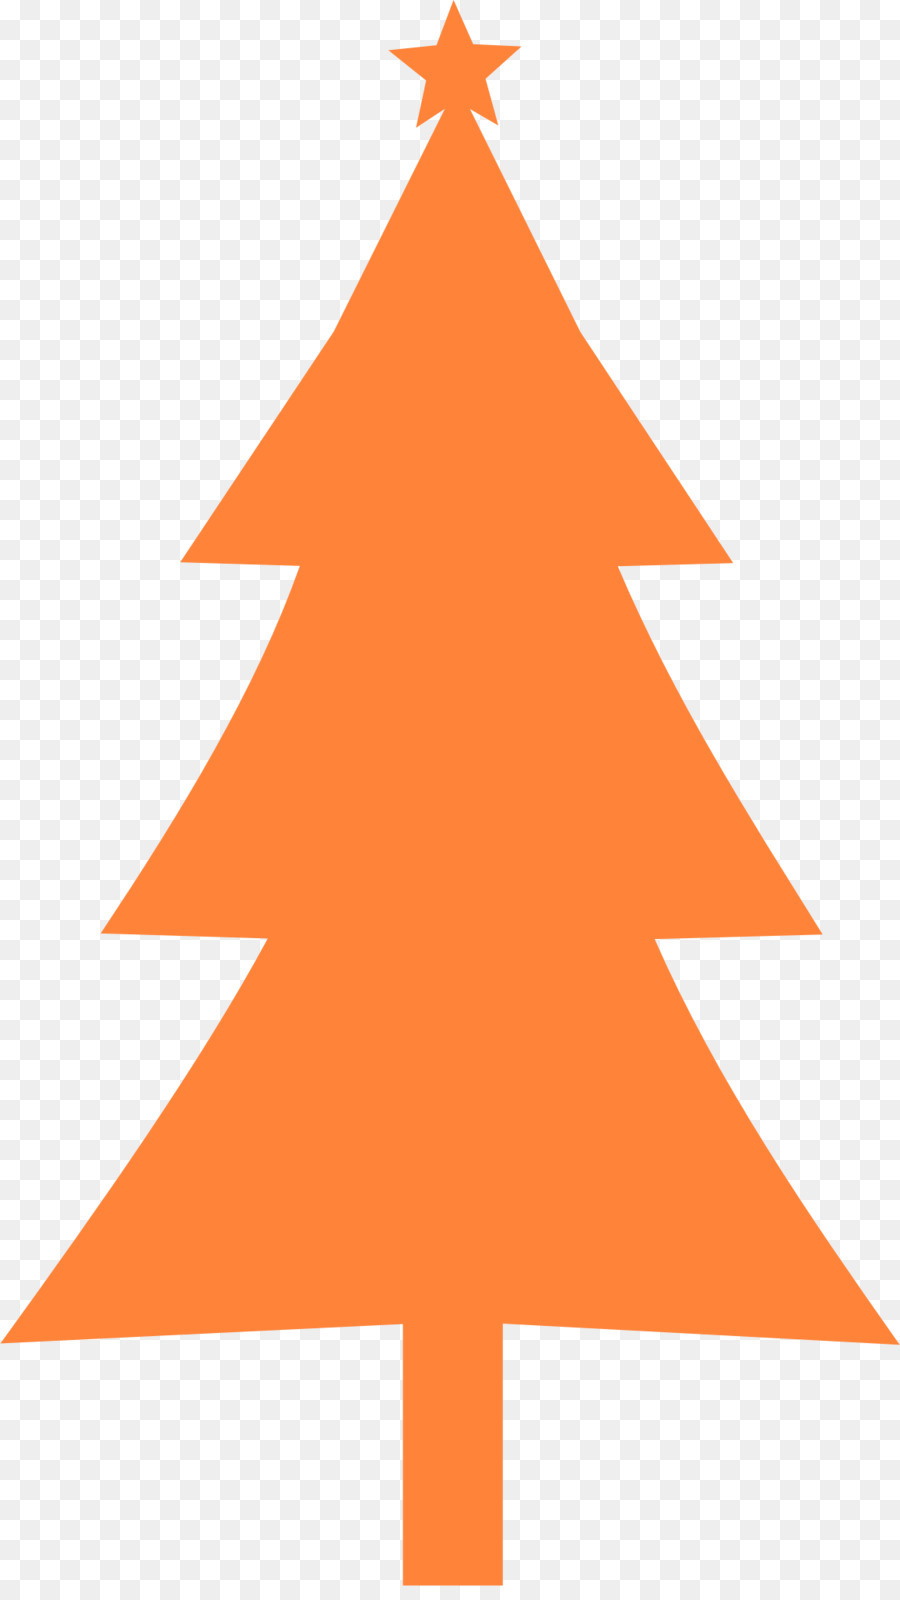 Christmas tree Silhouette Clip art - orange tree png download - 1156*2037 - Free Transparent Christmas Tree png Download.